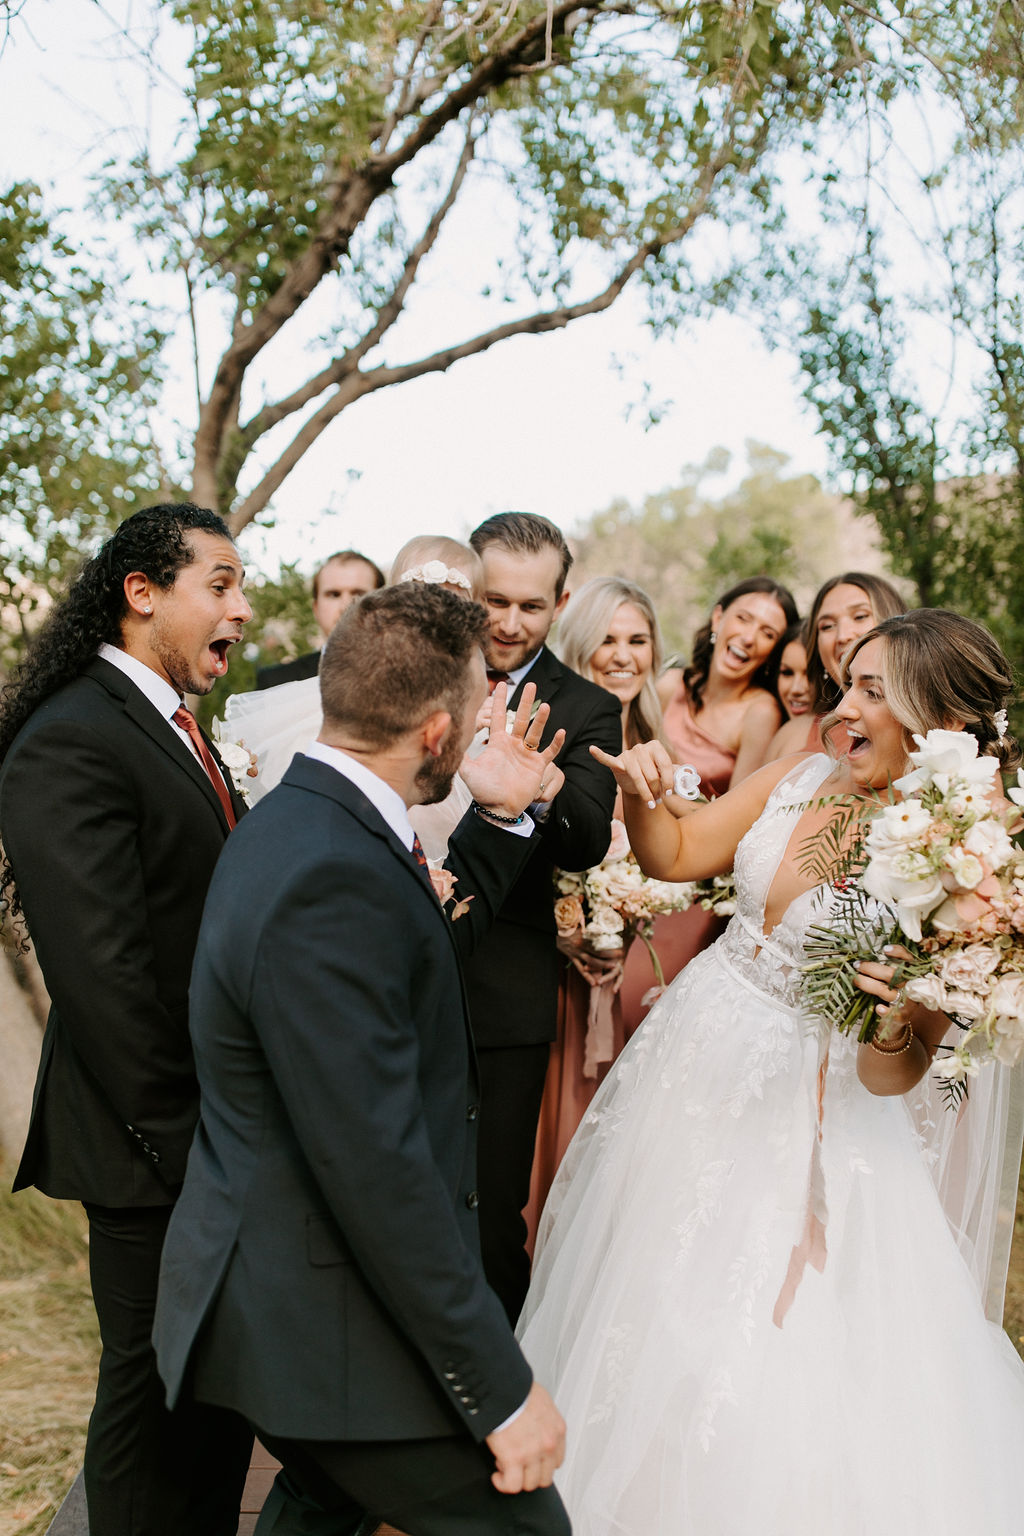 Bride pointing at groom's wedding ring with bridal party after getting married 